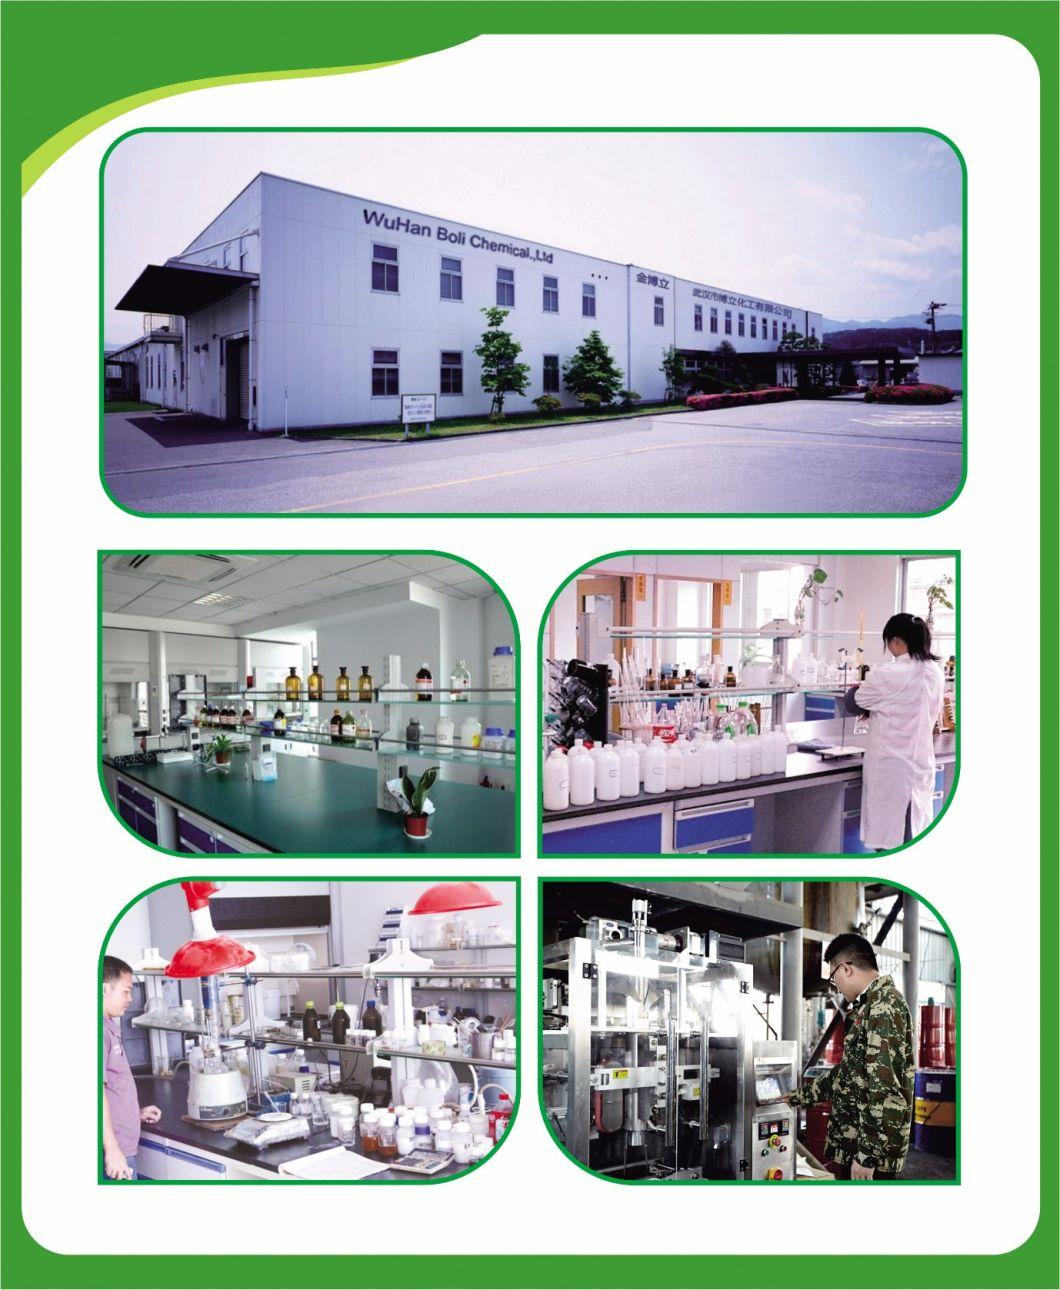 Constructional and Car Manufacturing Footwear Making Furniture Industry Favorite Good Low Cost Big Factory Chosen Glue